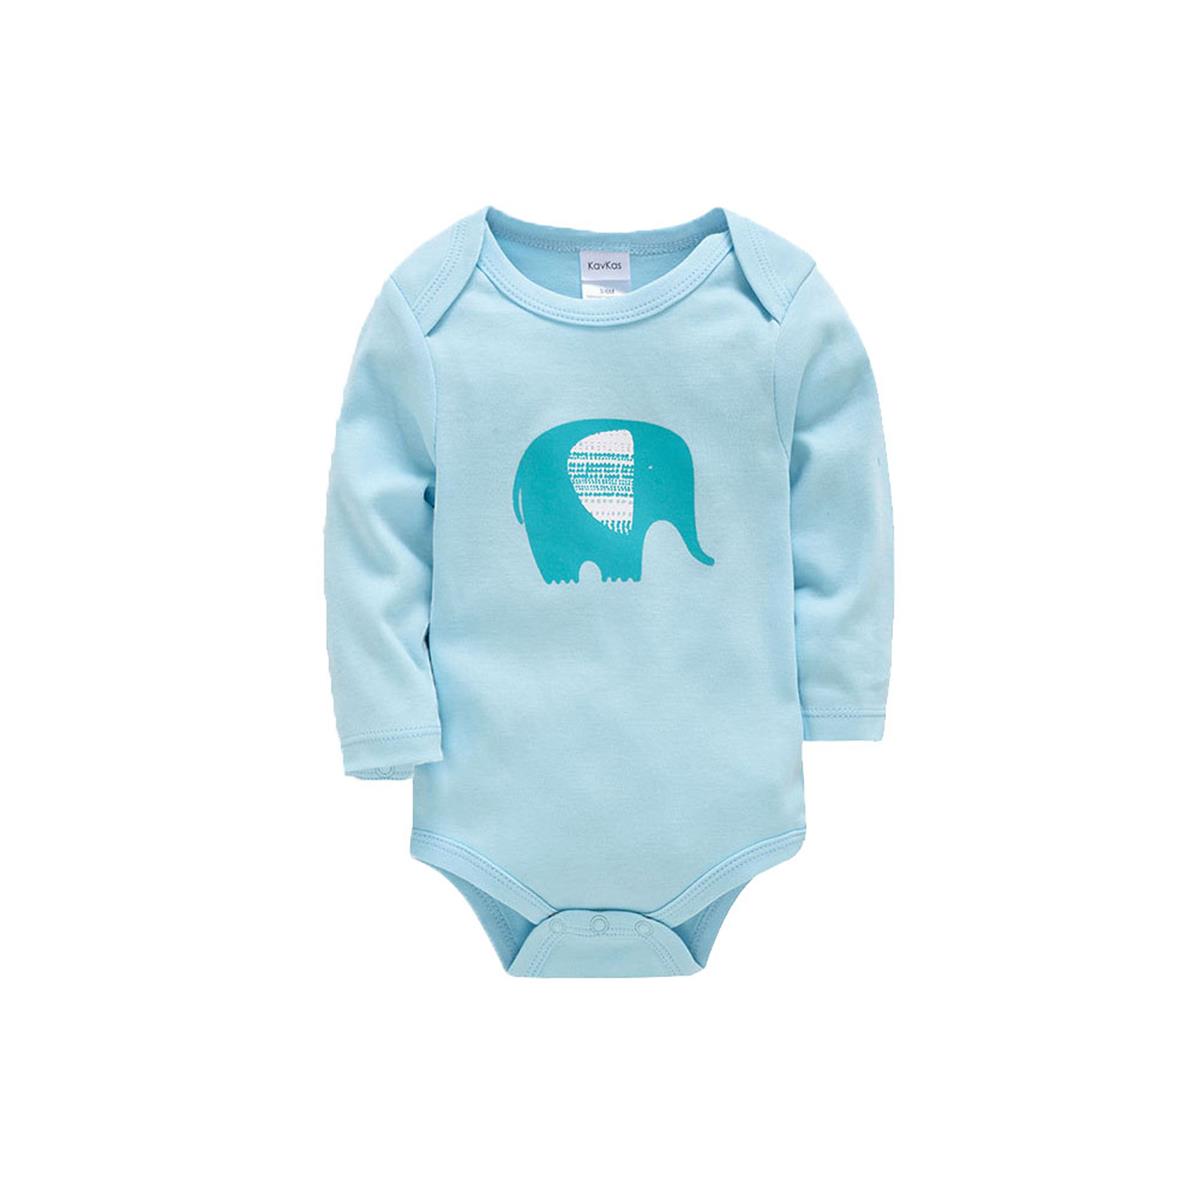 3 Piece Jumpsuits For Baby Boy